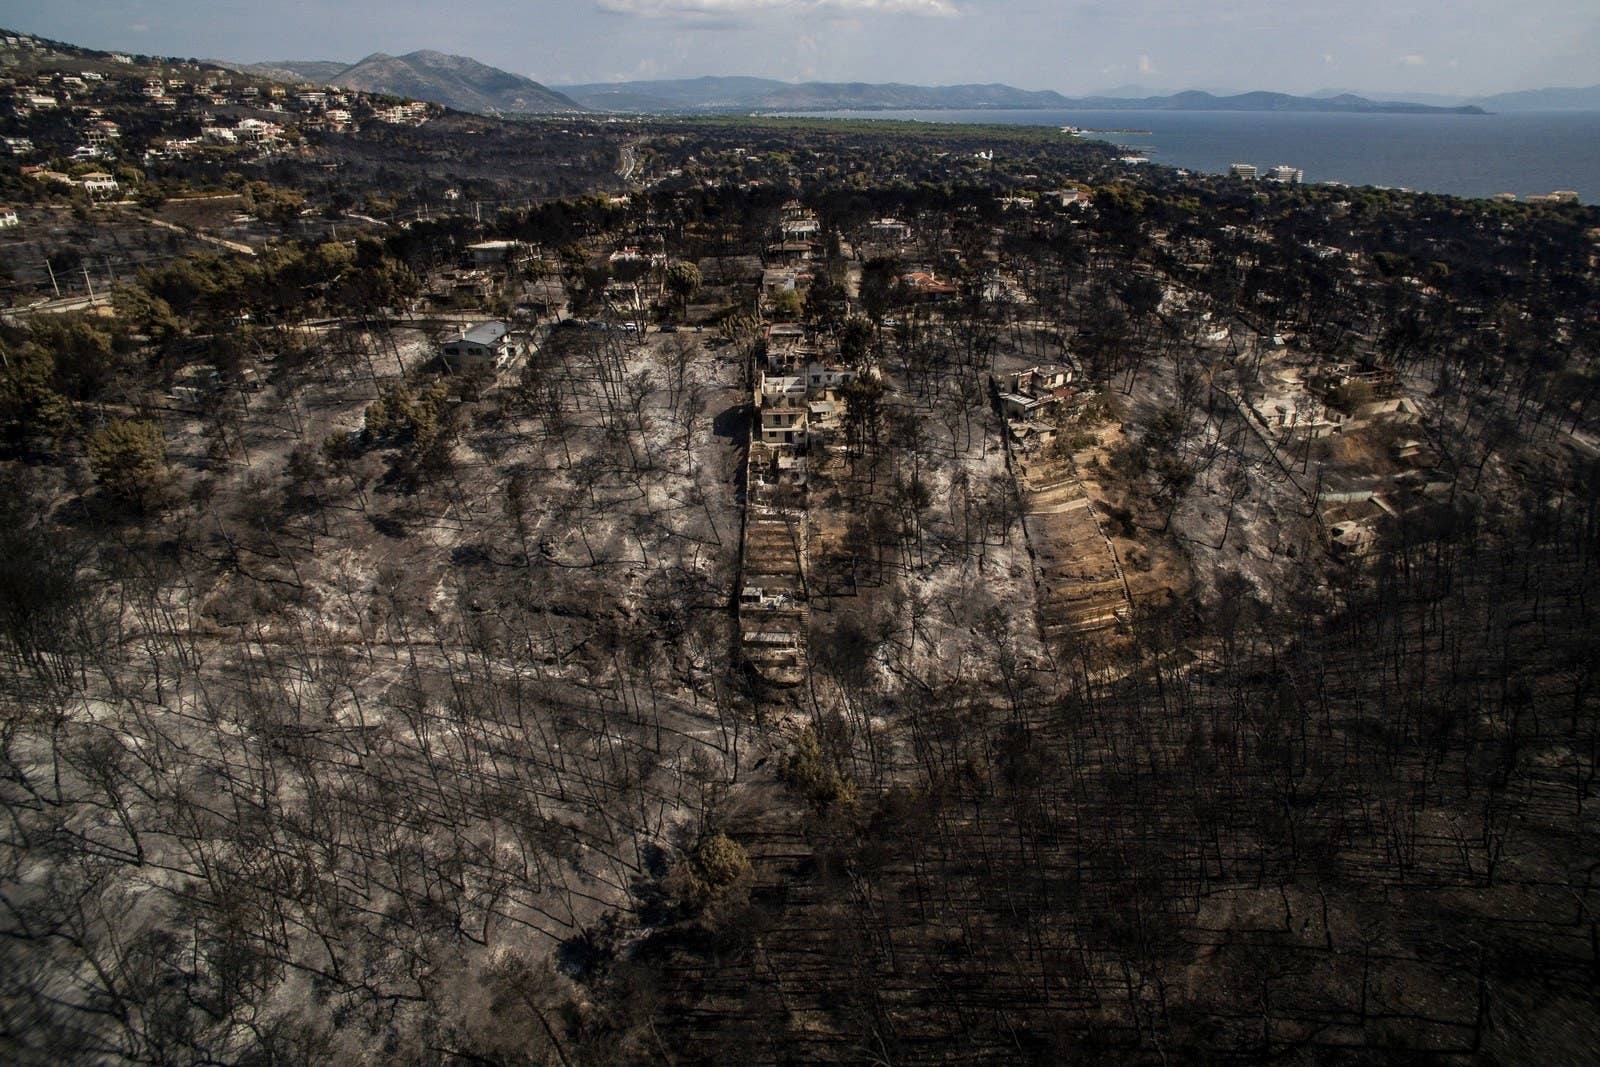 A scorched area following a wildfire in the Greek village of Mati, July 26.